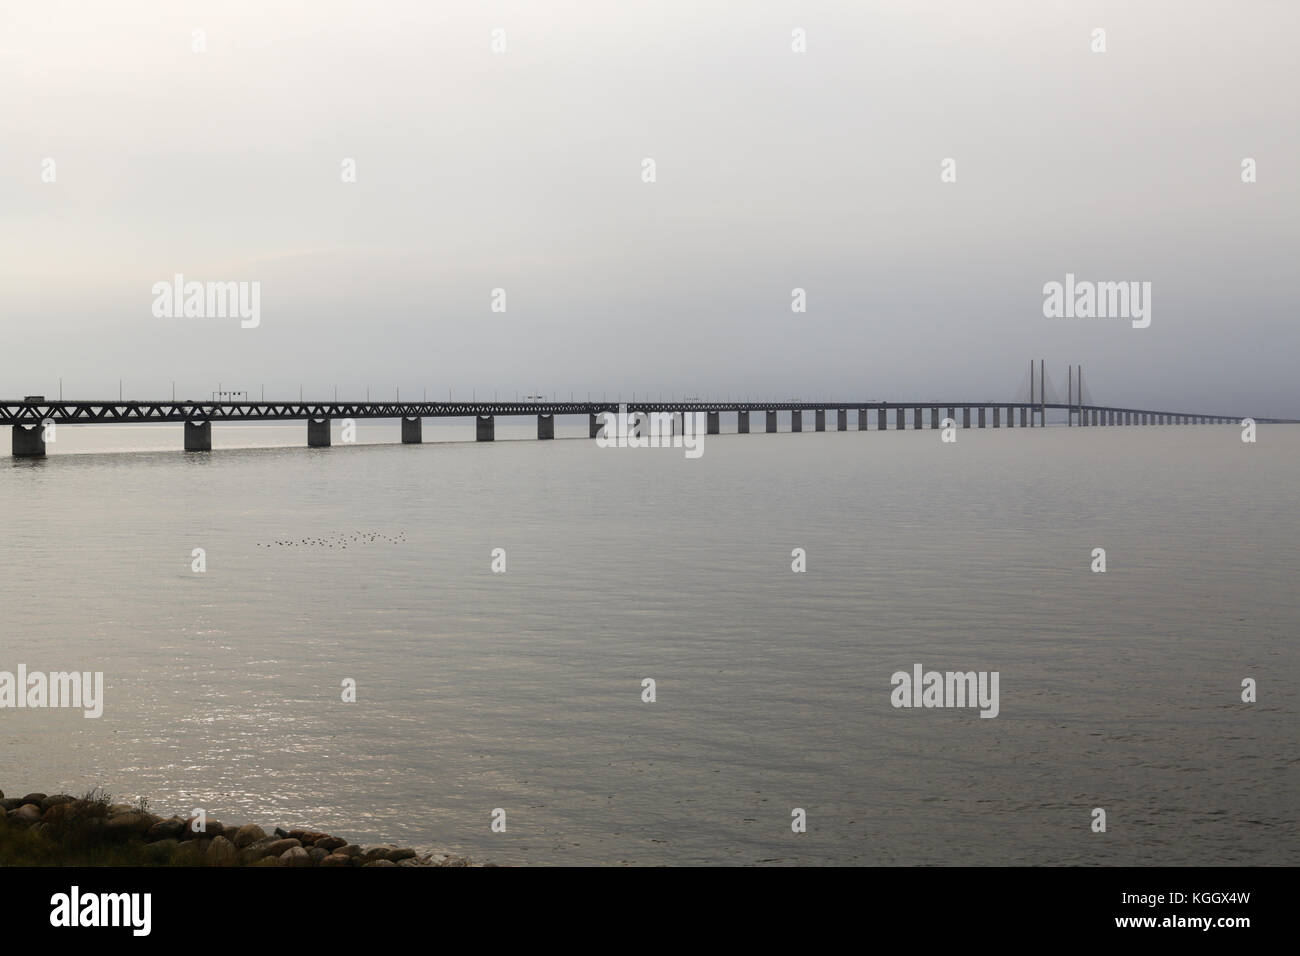 The Oresund Bridge connects Sweden and Denmark and is a combined twin-track railroad and four-lane highway bridge-tunnel across the Oresund strait. Stock Photo